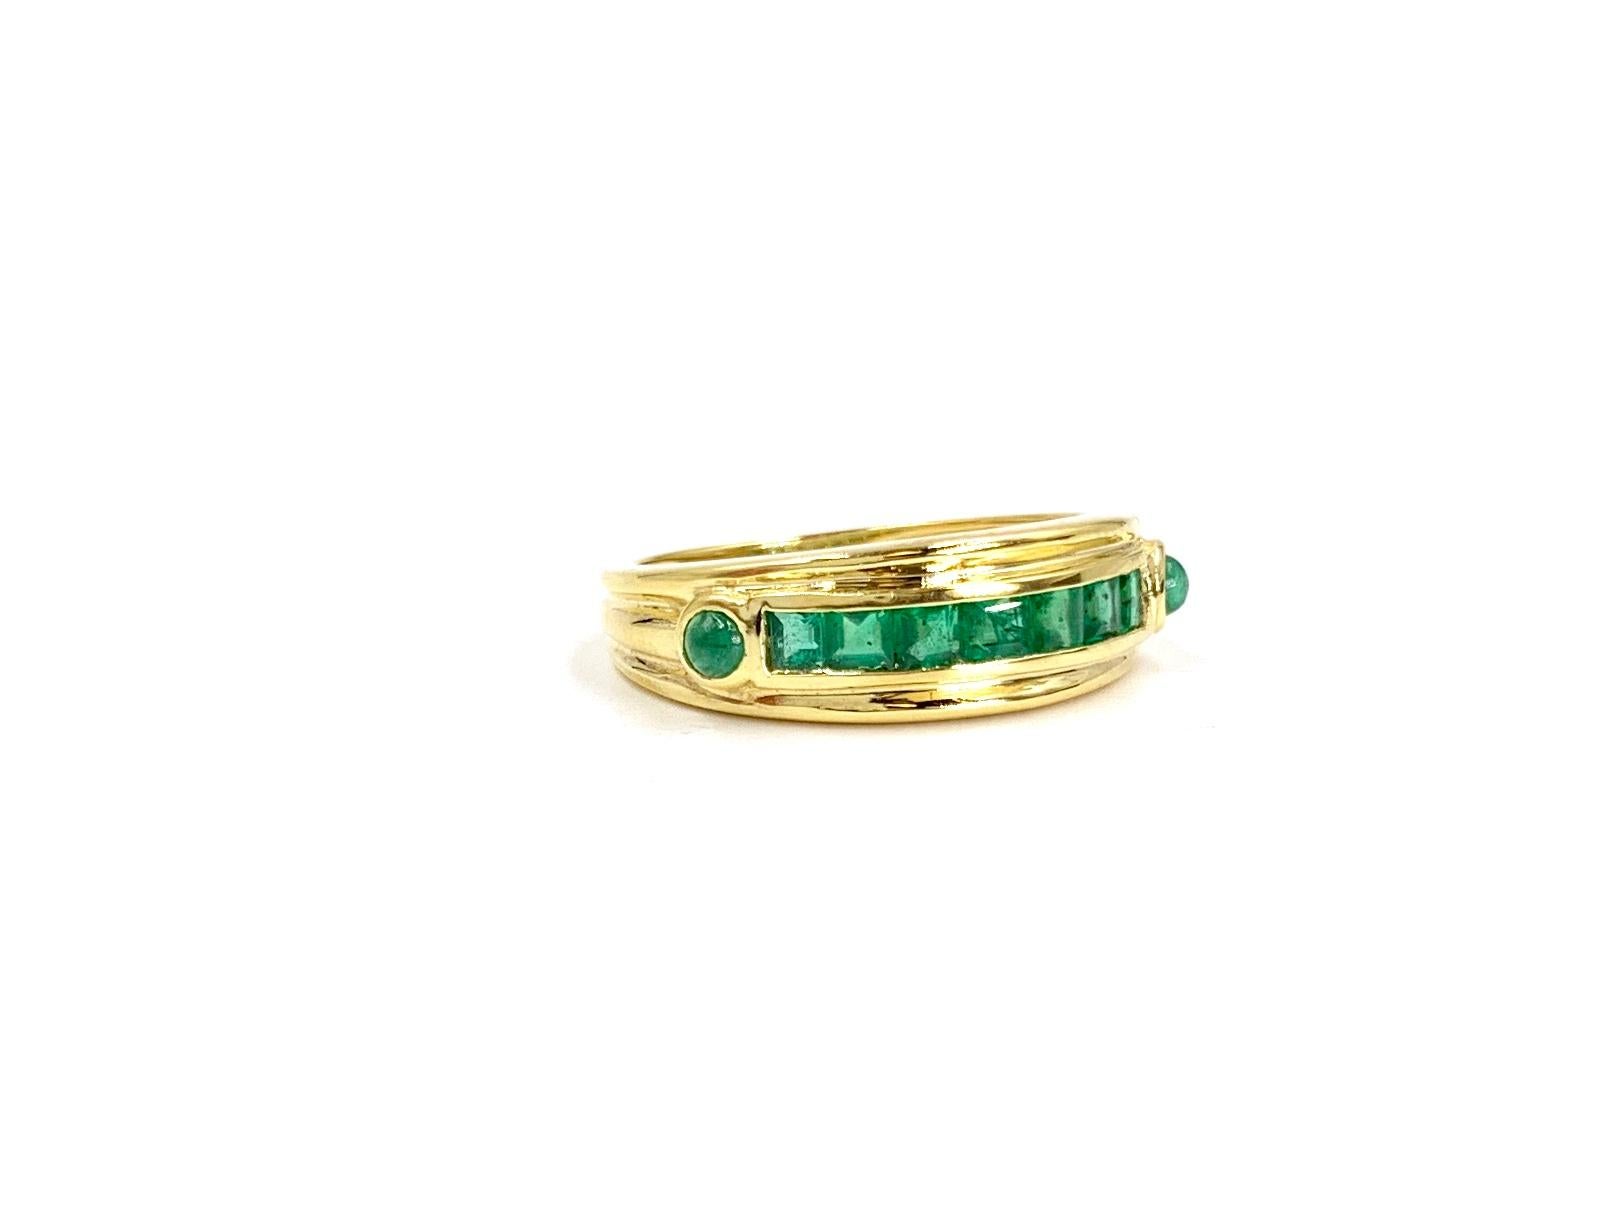 A wearable polished 18 karat yellow gold band style ring featuring a single row of seven channel set princess cut green emeralds flanked by two round cabochon emeralds. Emeralds have an approximate total weight of 1.11 carats and are of high quality